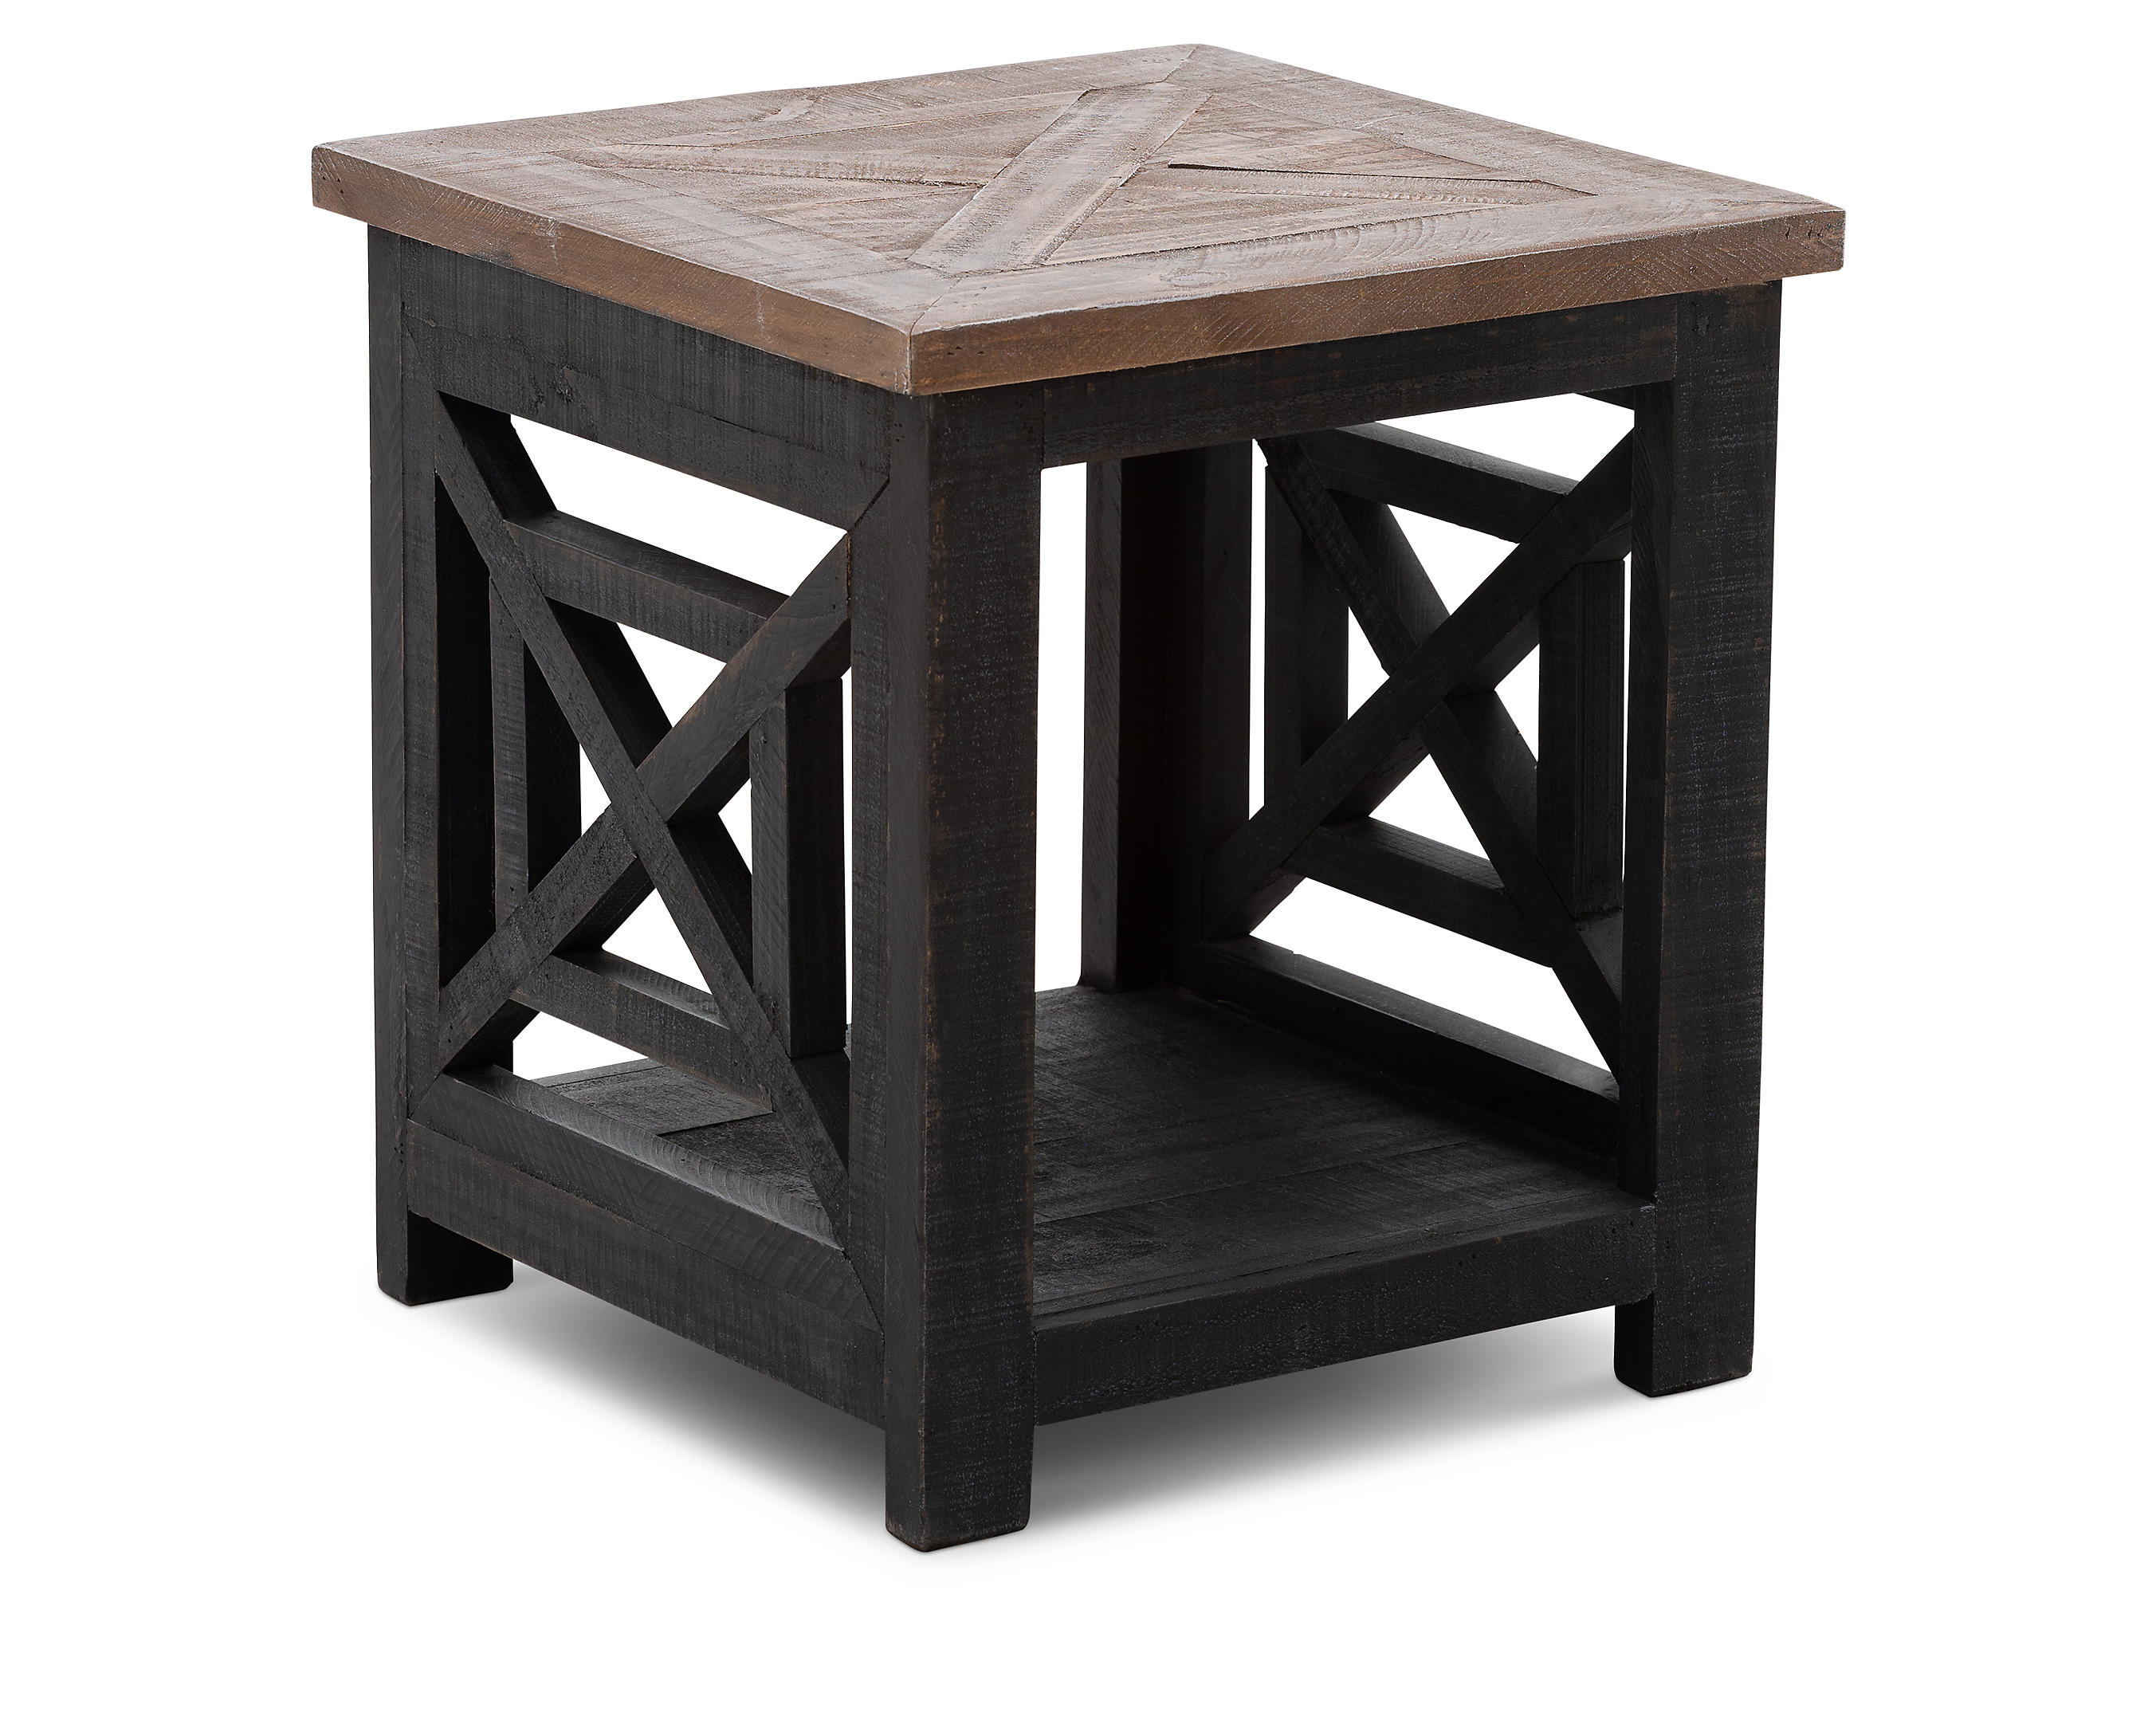 Braxton End Table Furniture Row, Furniture Row Living Room End Tables